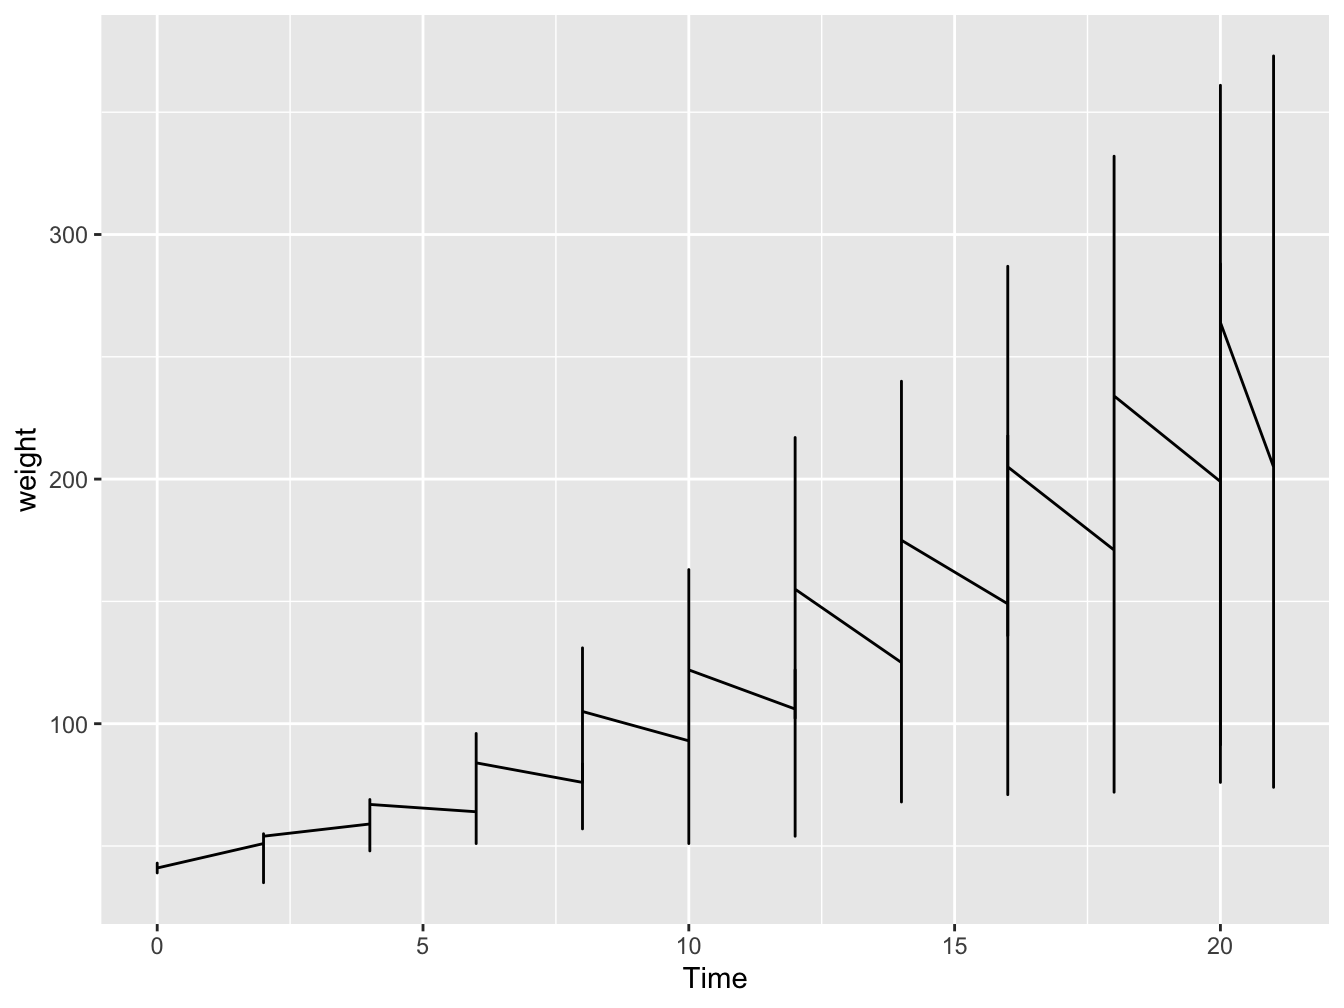 chapter-3-introduction-to-ggplot2-plotting-in-r-using-ggplot